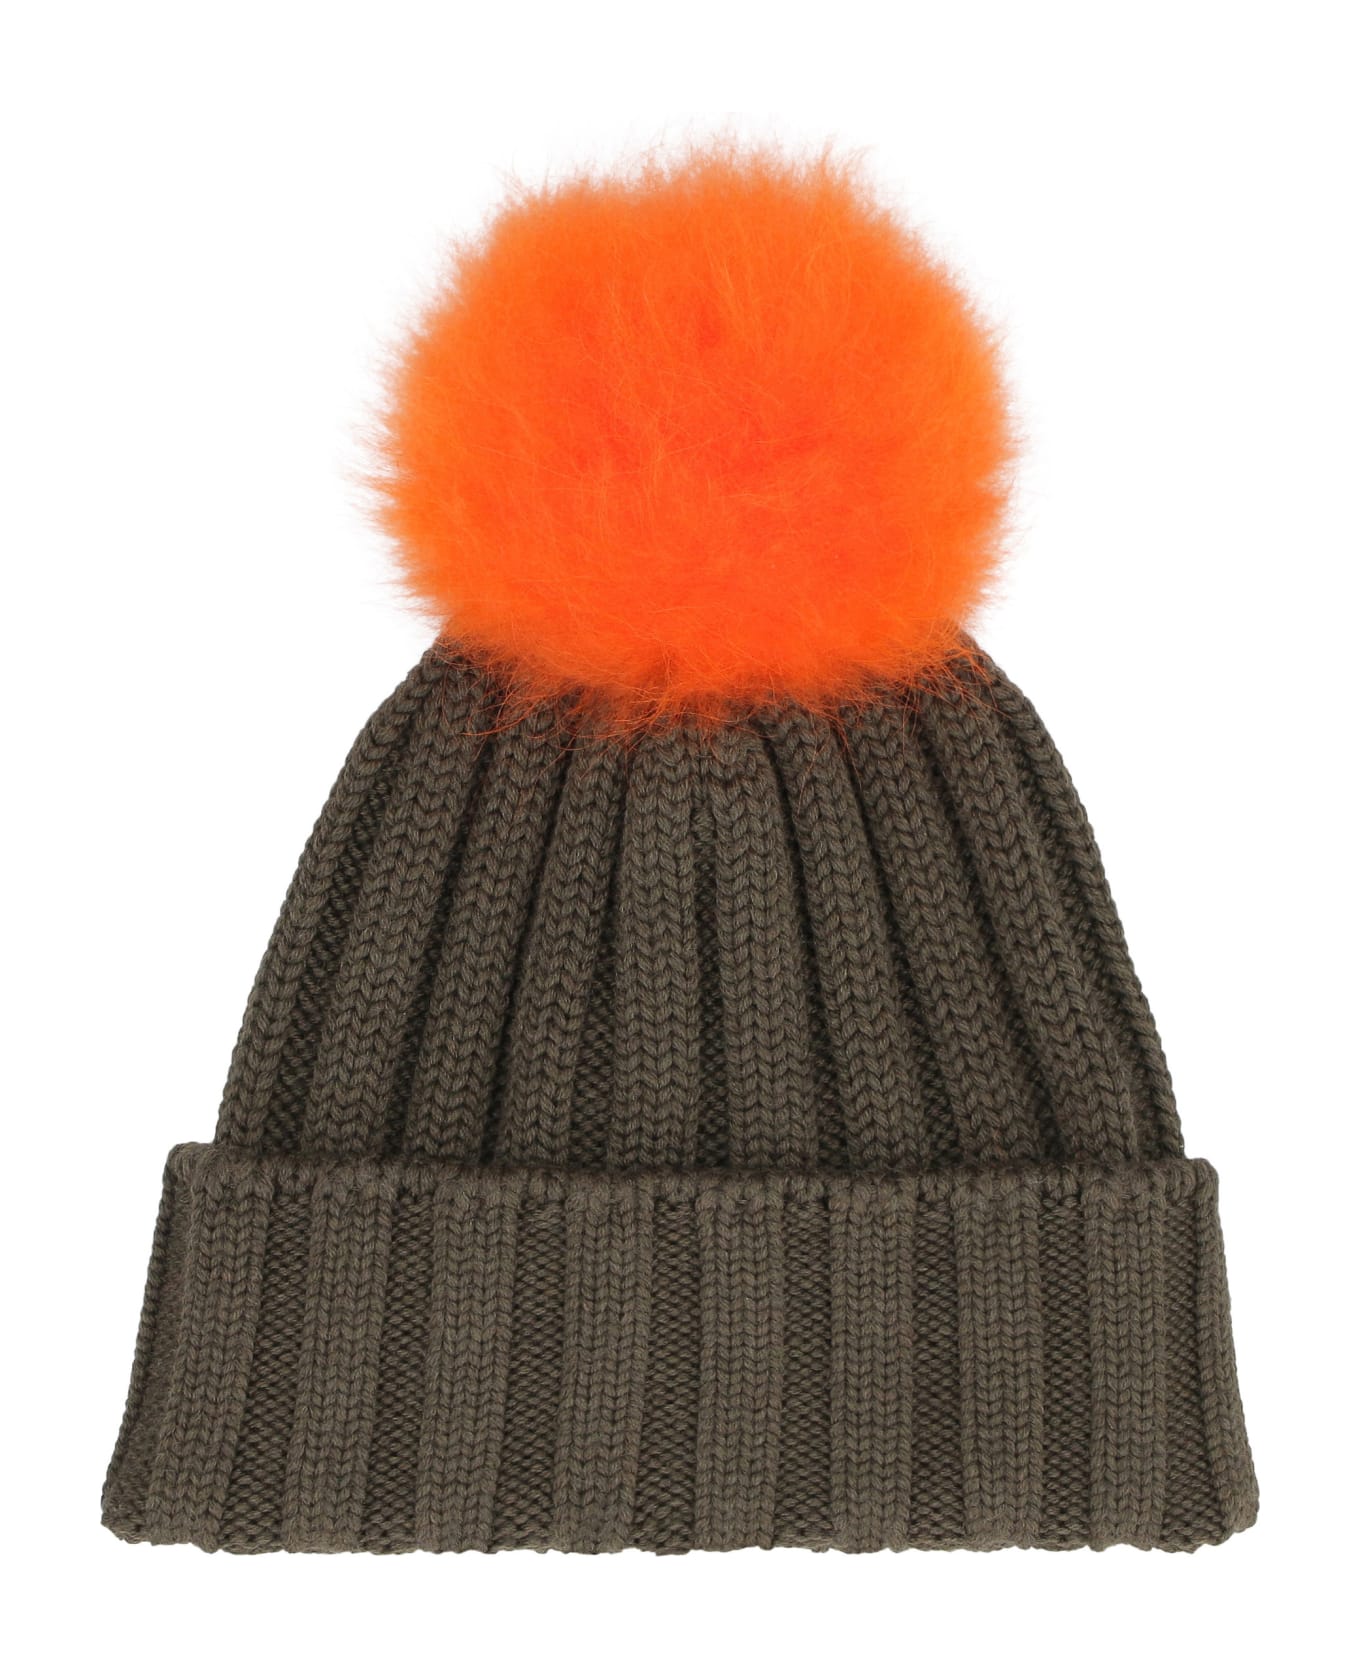 Woolrich Knitted Wool Hat With Pom-pom - green 帽子